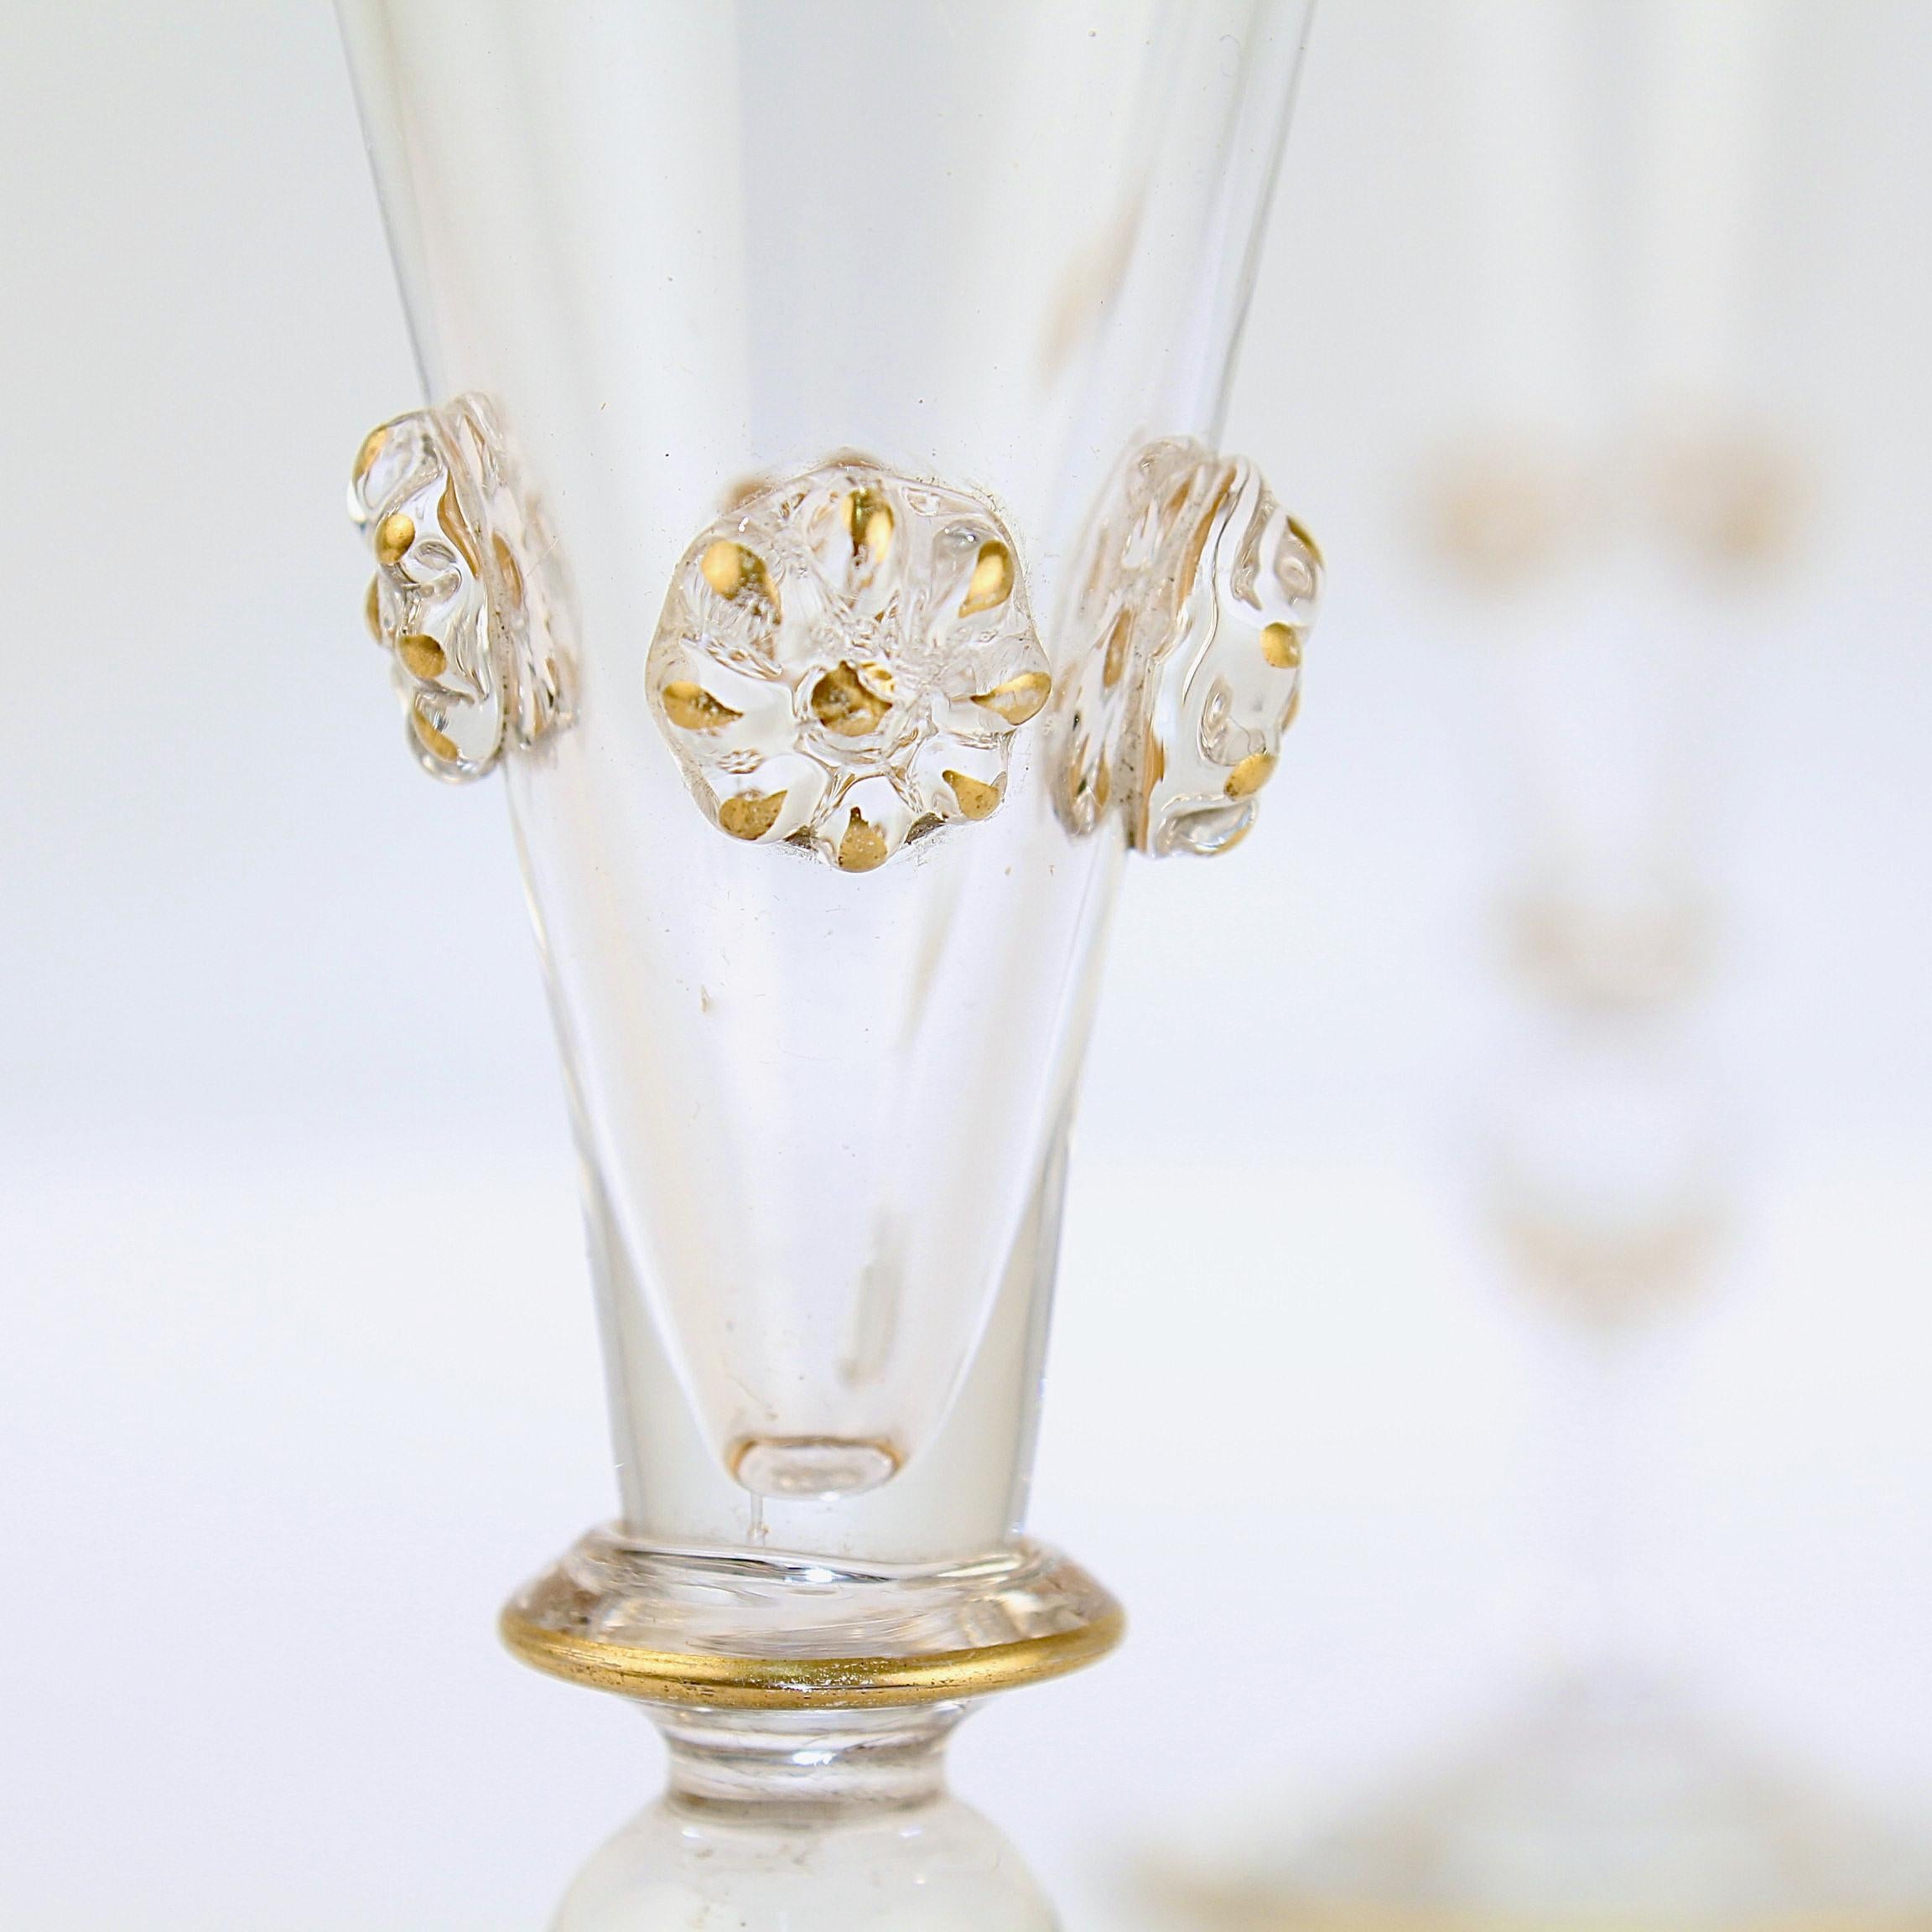 Pair of Old or Antique Bohemian Glass Champagne Flutes with Applied Knops 2